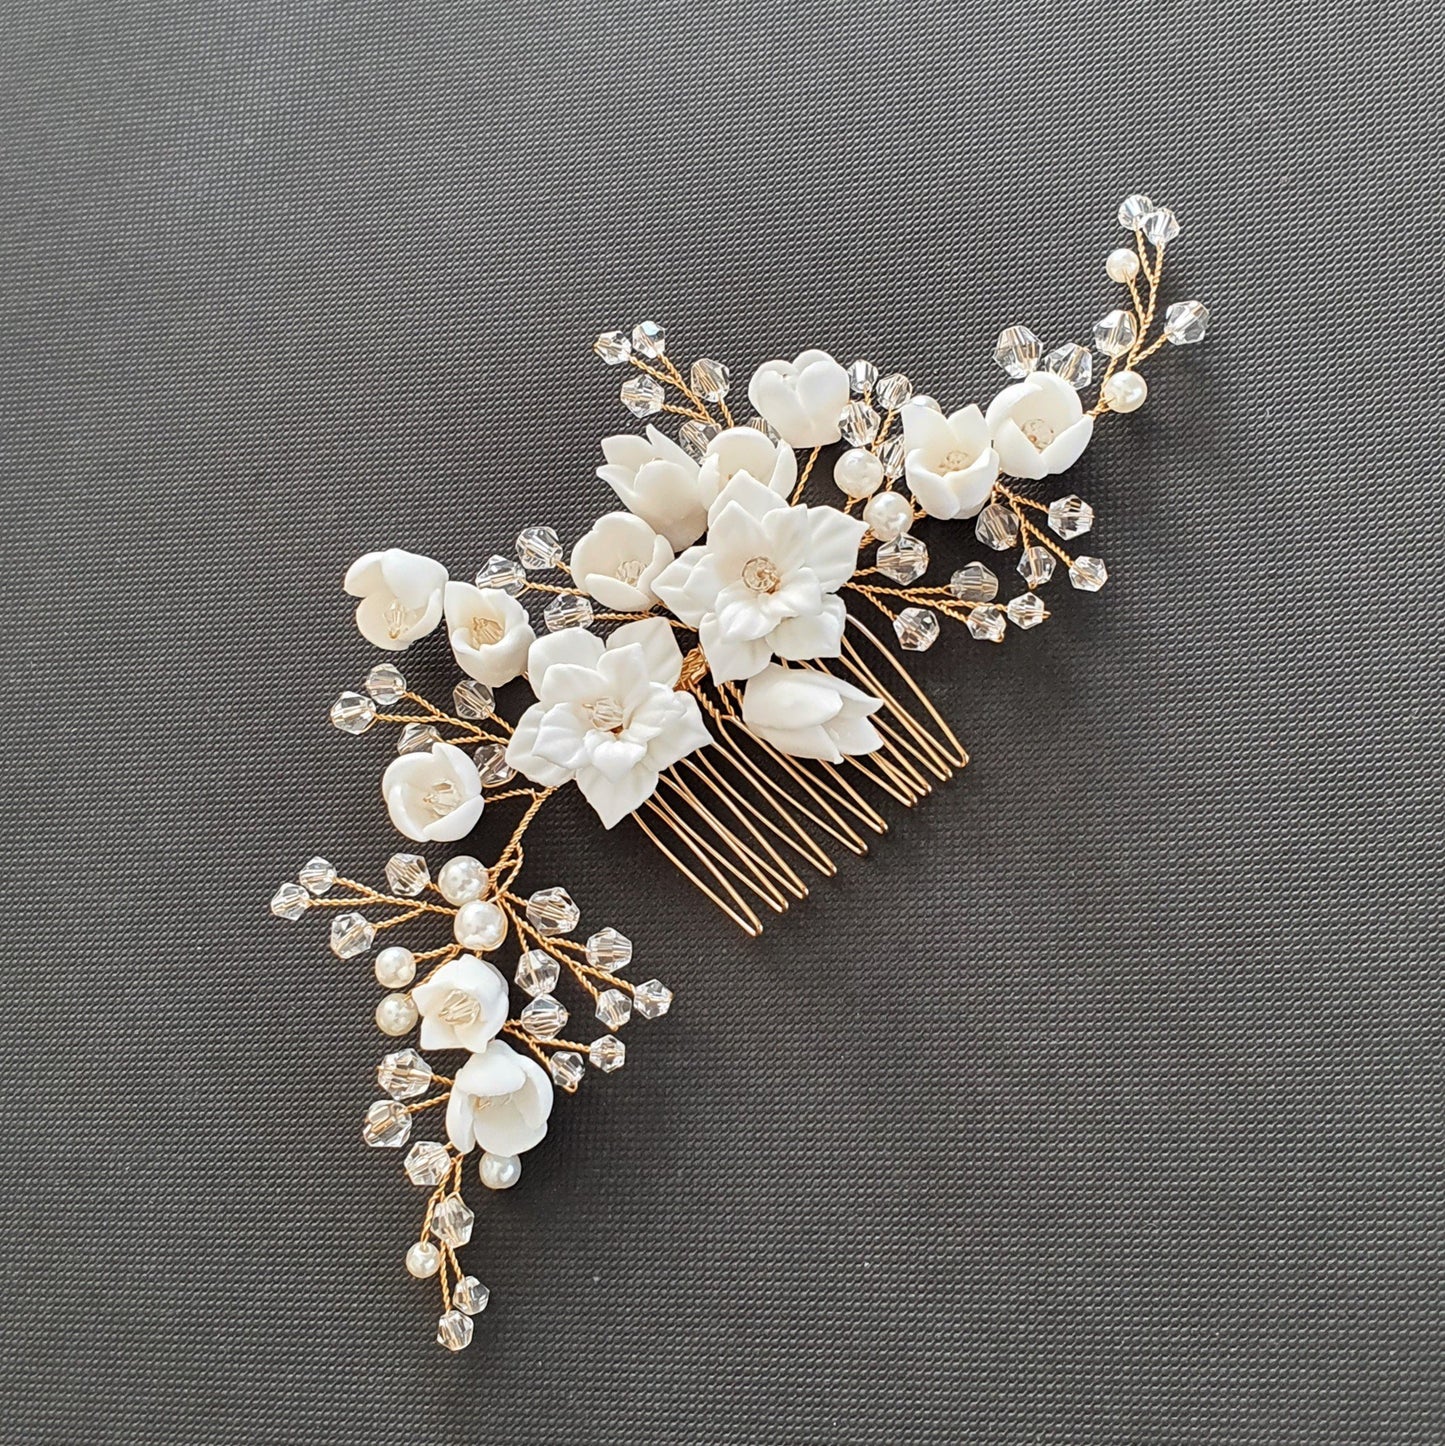 Flower and Crystal Bridal Hair Comb in Silver-Tulip